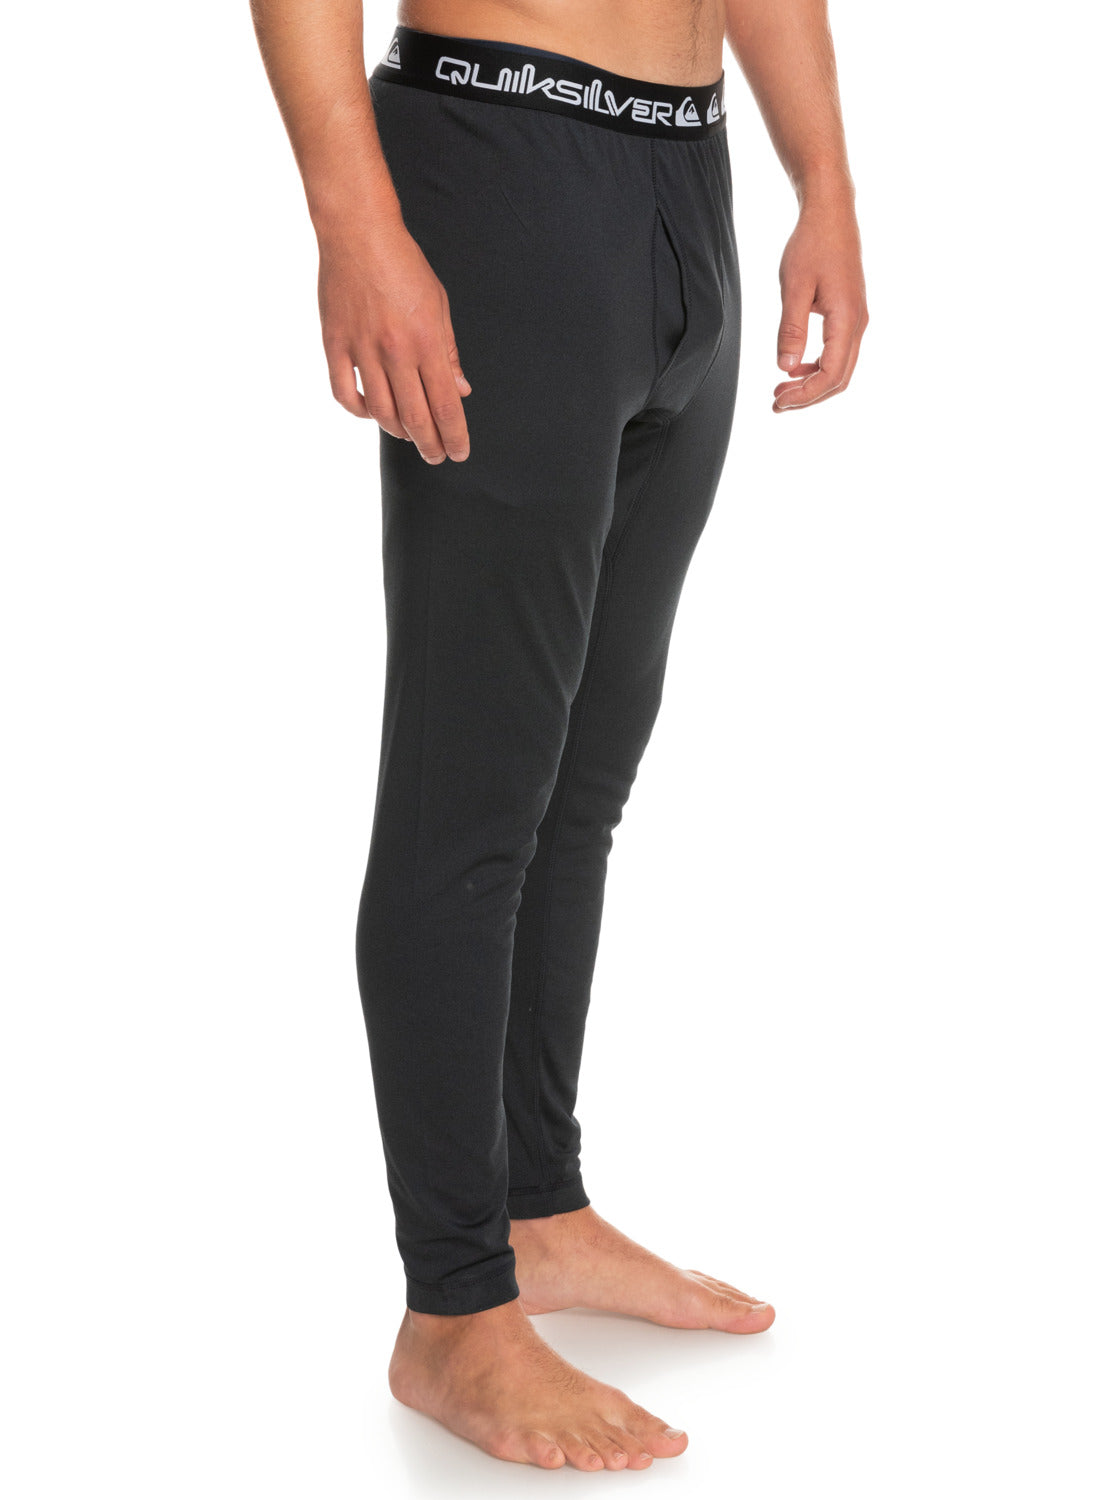 Territory Layer - Technical Base Layer Bottoms for Men